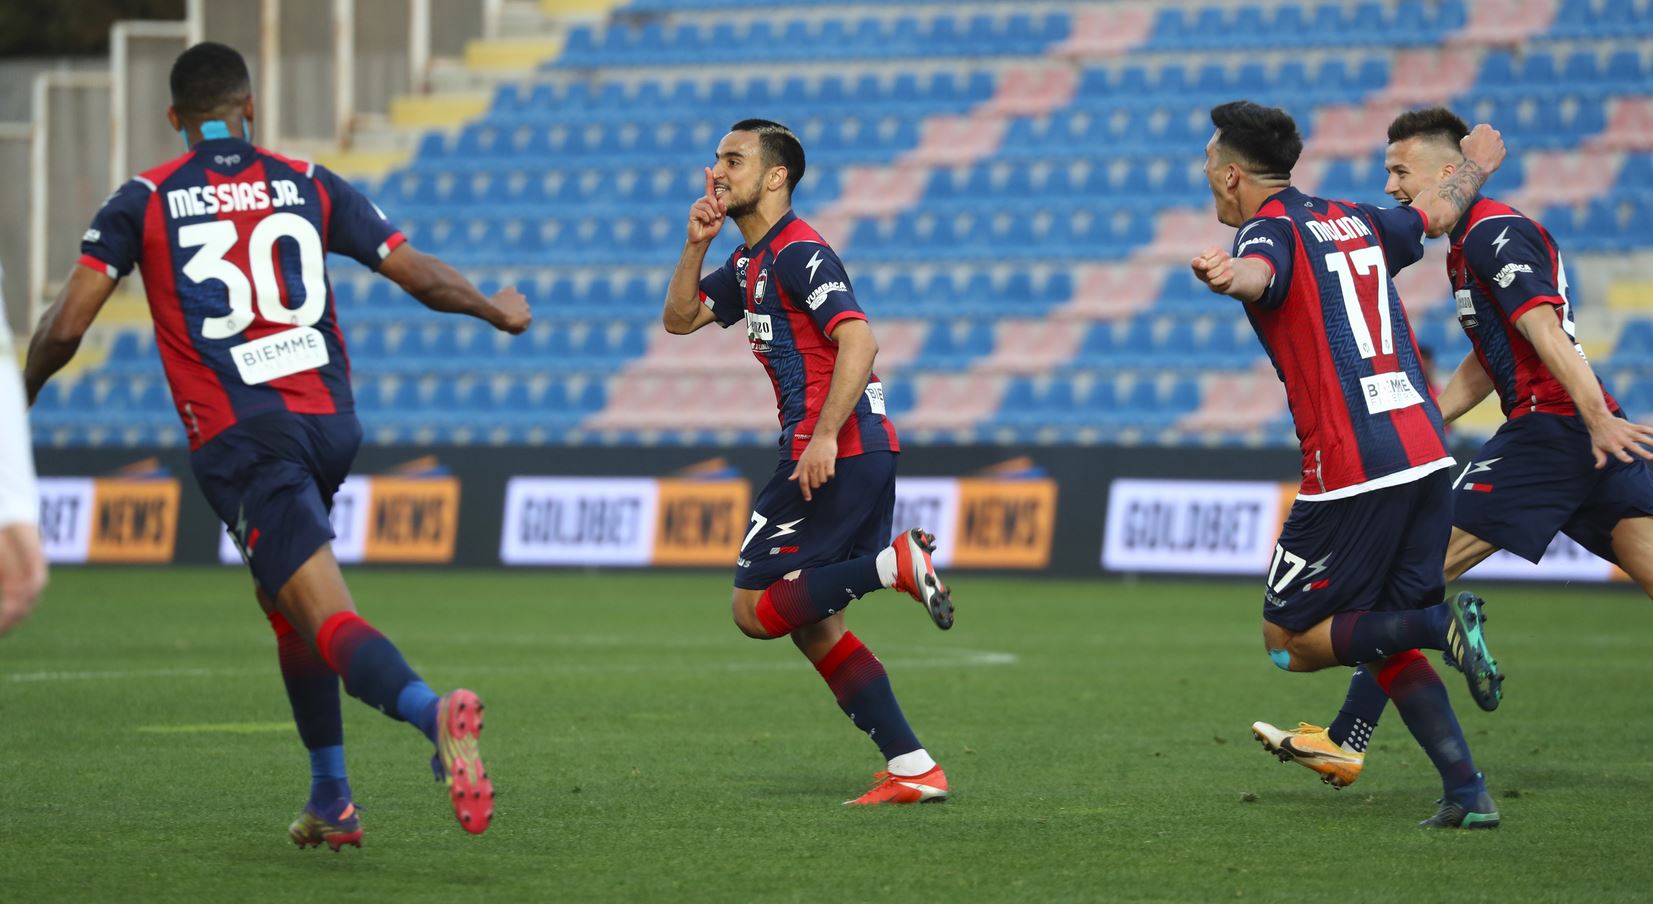 Five out of the six goals scored in Crotone - Torino were a shoo-in for the top-five goal of the Serie A Round 26 considerations